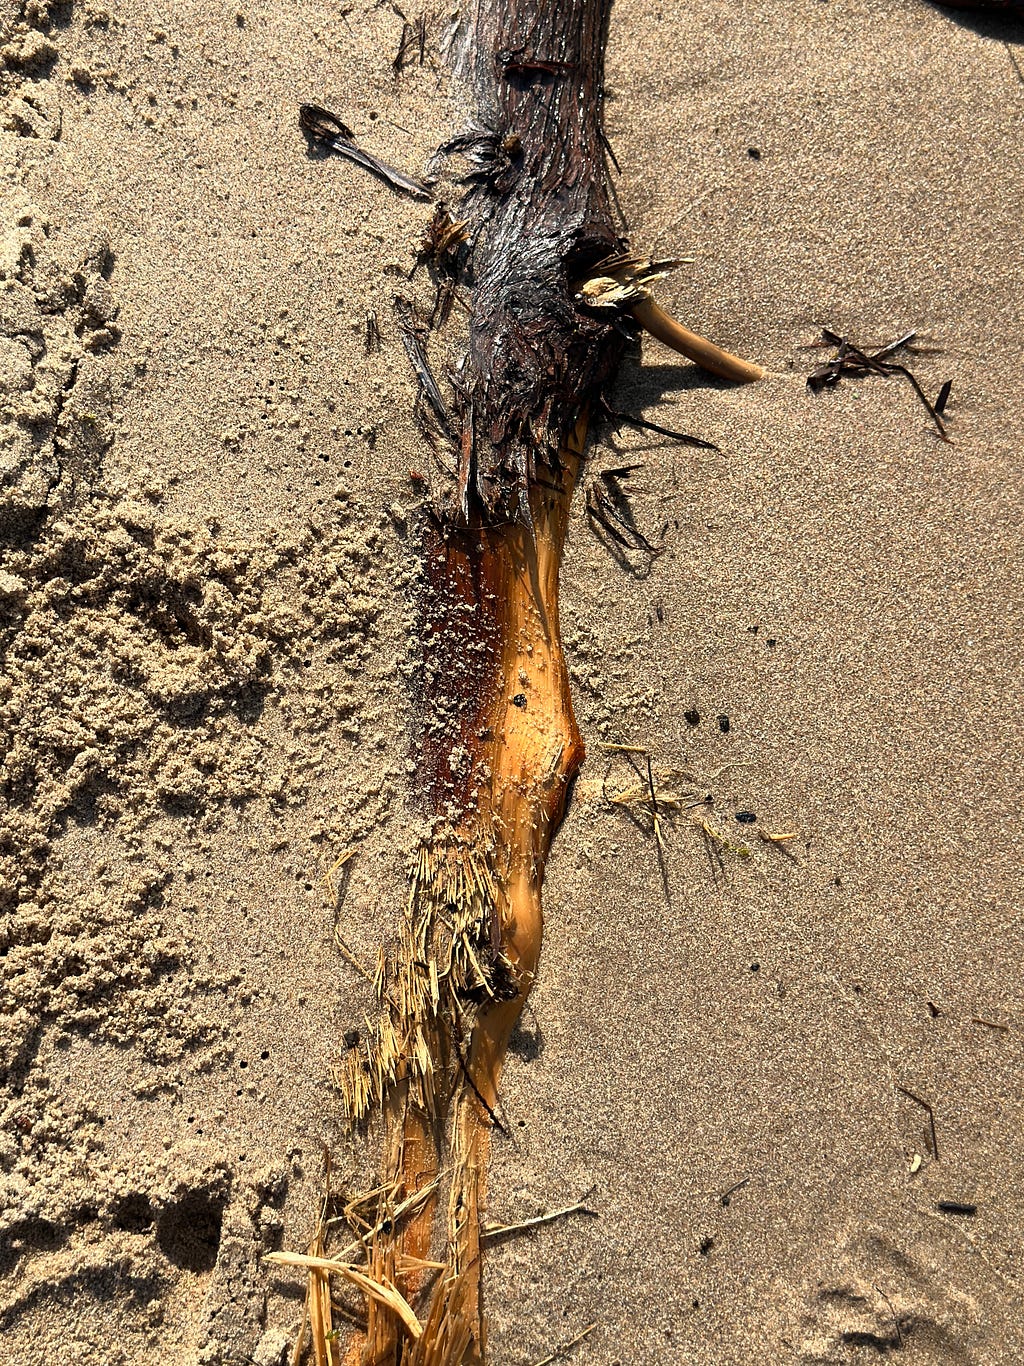 Driftwood covered partically in beach